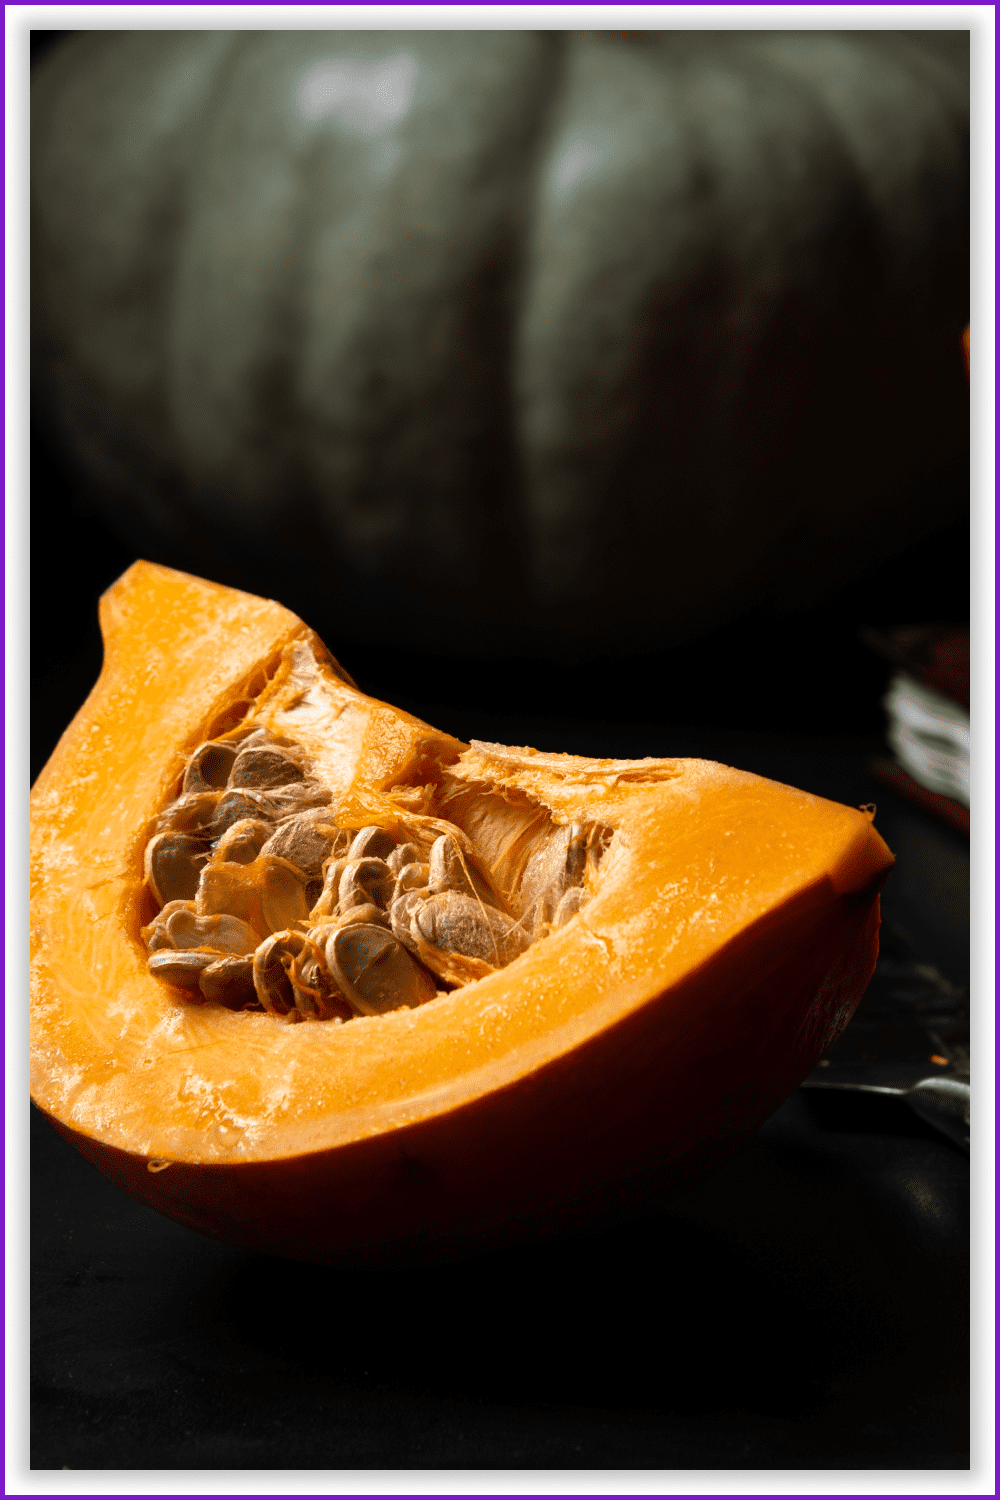 Detailed photo of a piece of pumpkin with seeds inside.